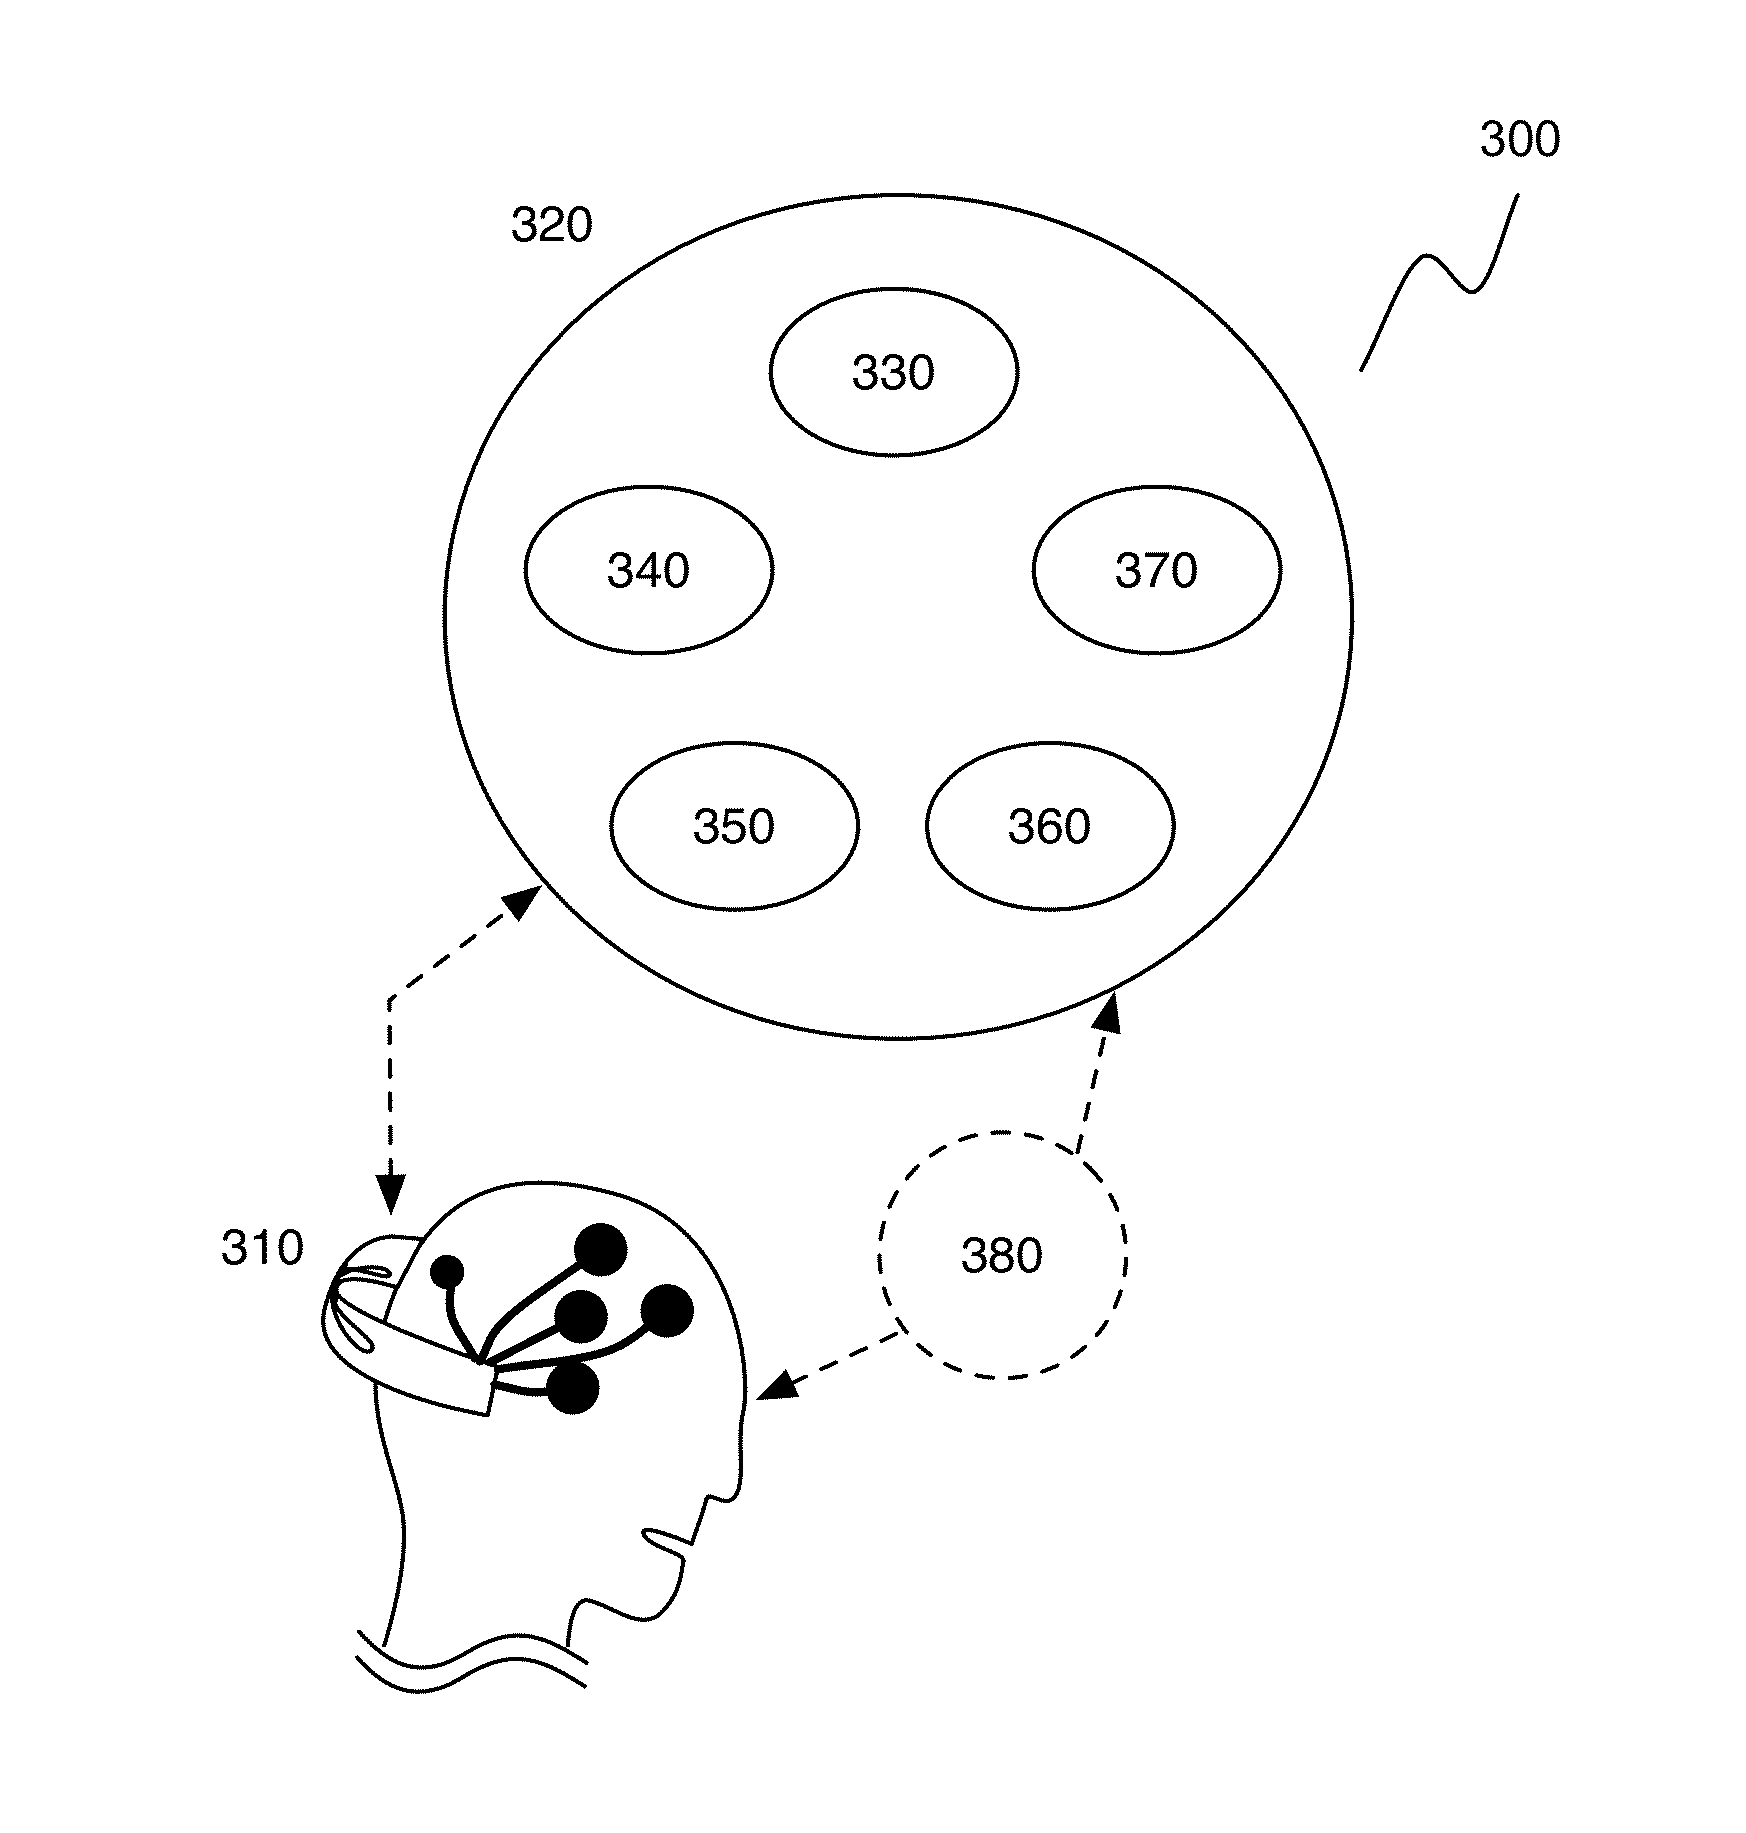 System and Method for Providing and Aggregating Biosignals and Action Data